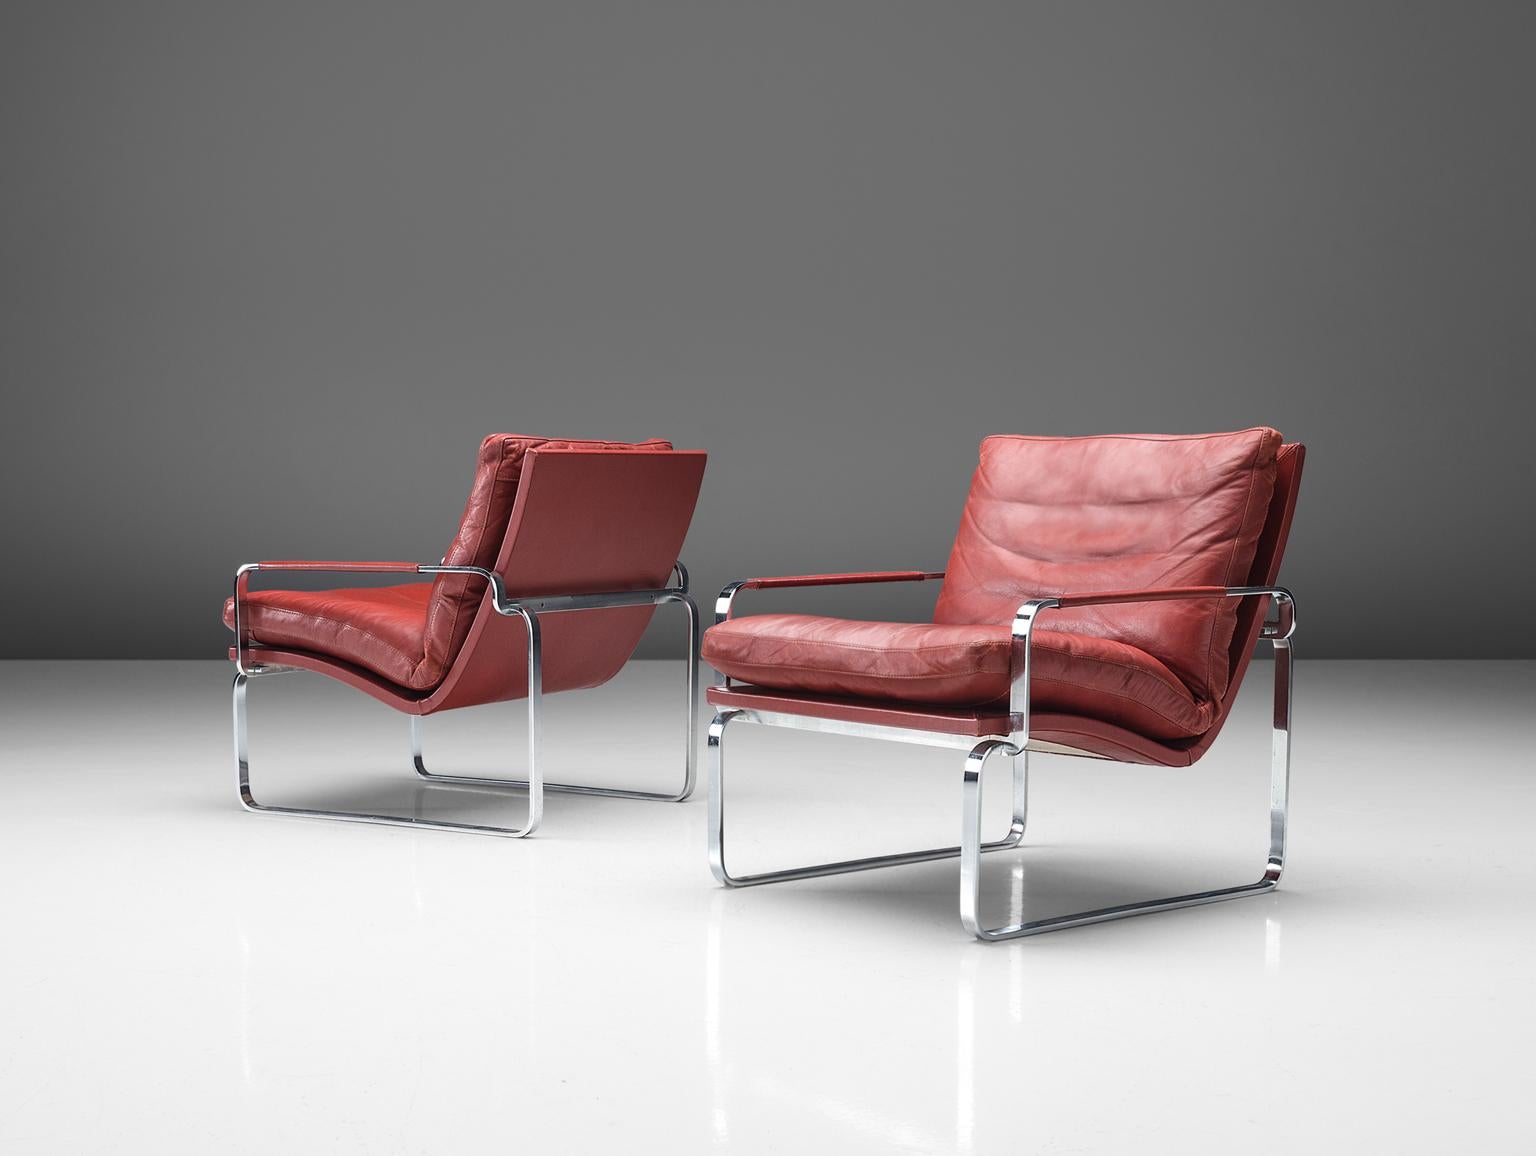 Jørgen Lund for Ole Larsen, BO 911 armchairs, red leather, steel, Denmark, 1980s.

Set of two modern armchairs chairs in steel and leather. Interesting detail is the leather that covers the thin metal armrests and the sculptural shape of the steel